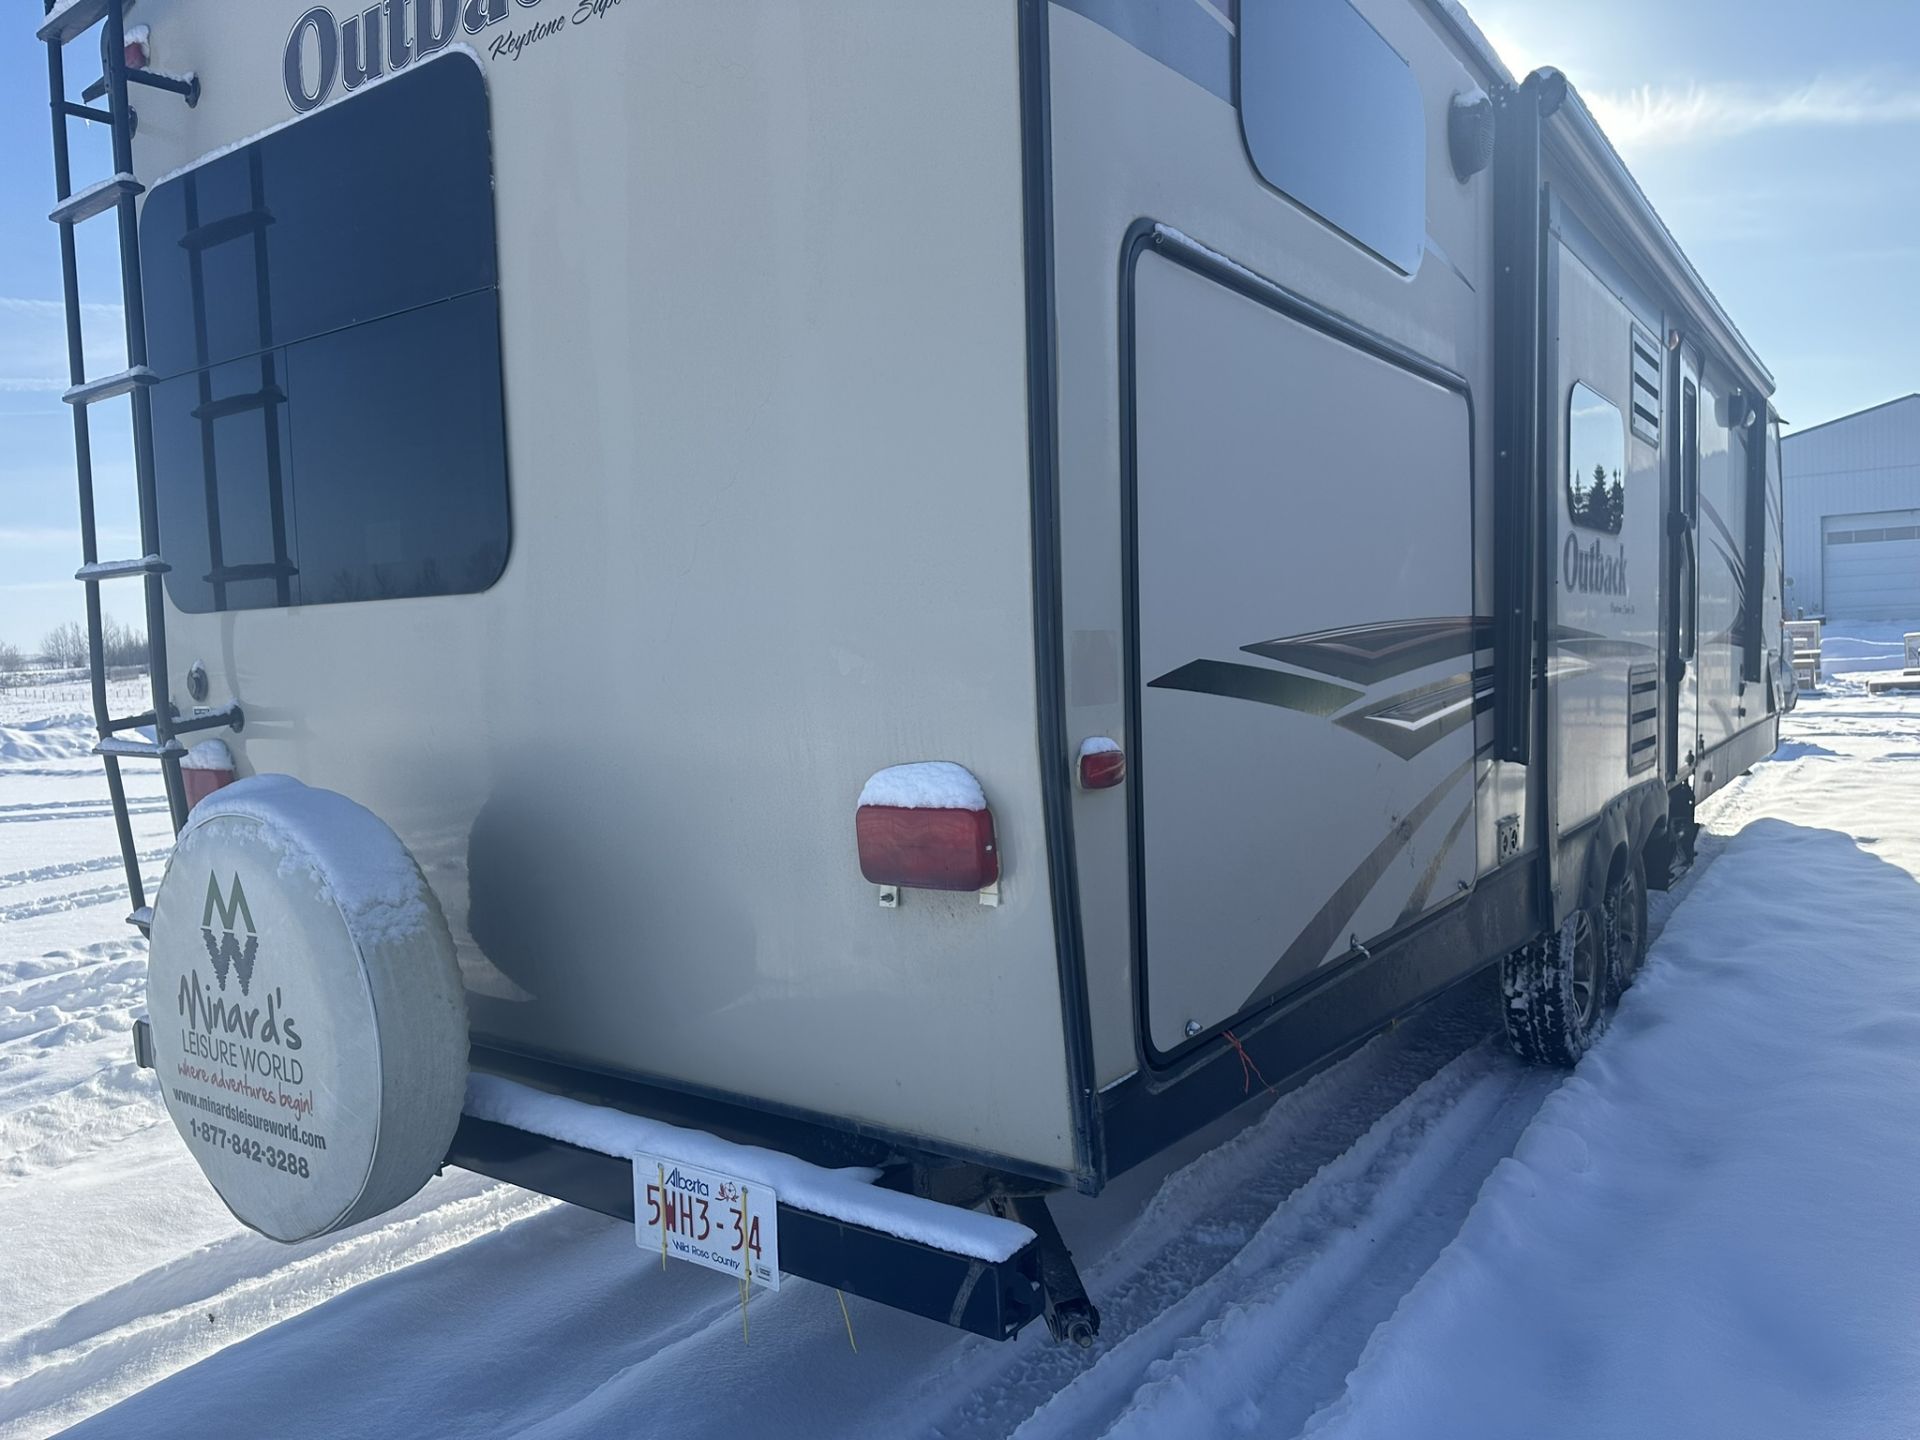 2014 OUTBACK KEYSTONE SUPER-LITE 33 FT HOLIDAY TRAILER, DOUBLE SLIDE, POWER AWNING, OUTDOOR KITCHEN, - Image 15 of 15